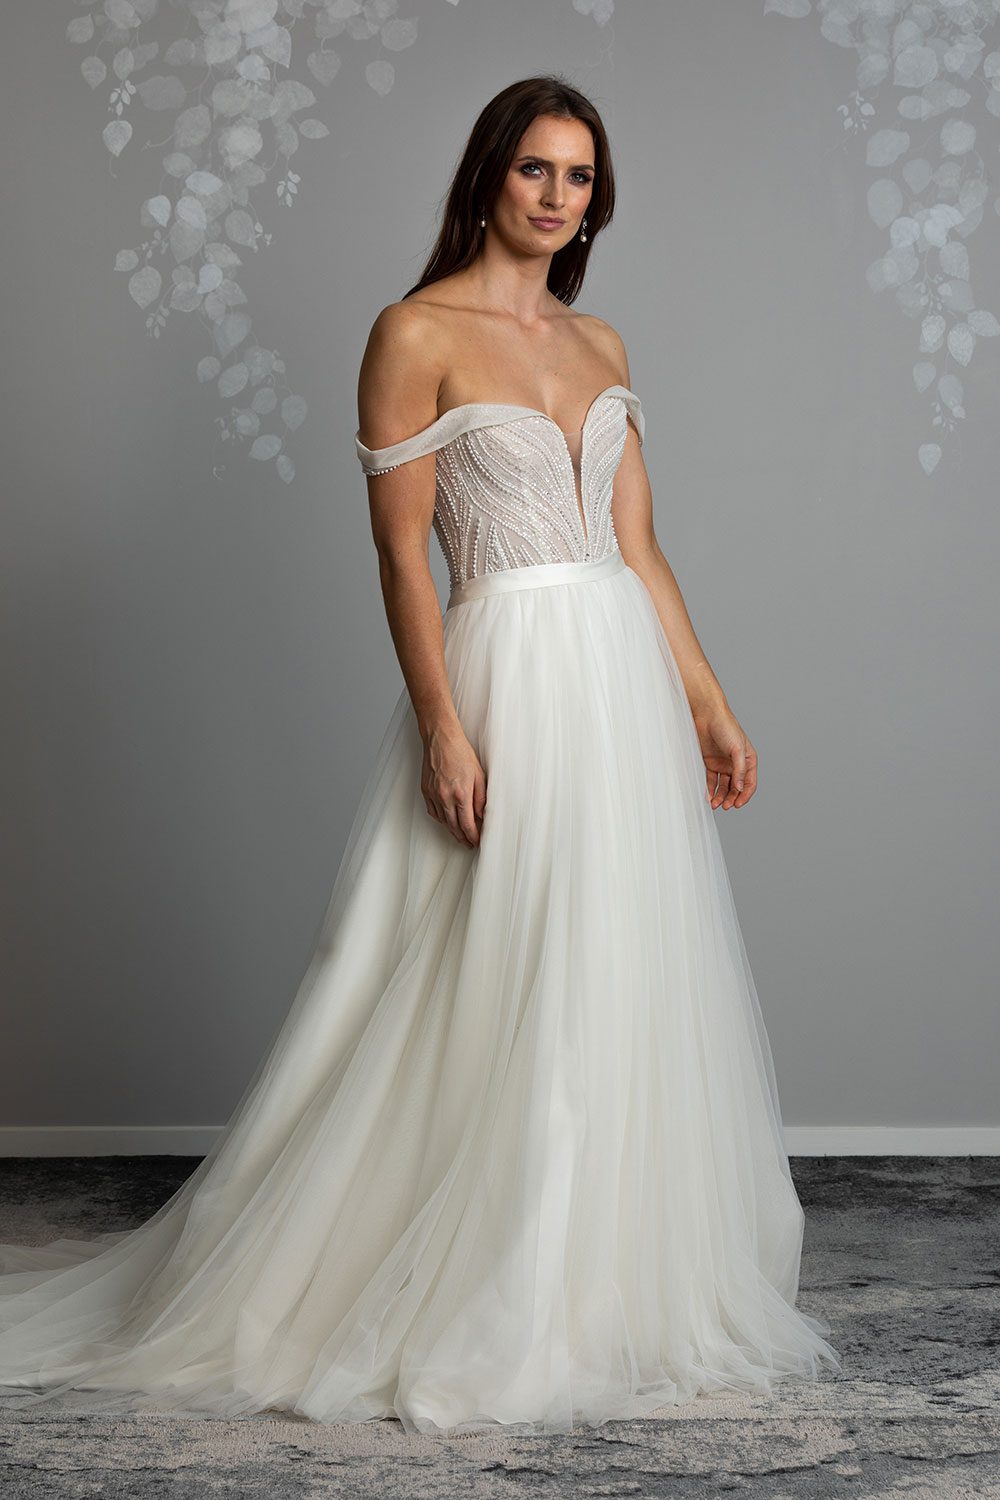 Aroha Wedding gown from Vinka Design - Beautiful & intricate pearl beading is hand-appliqued along this wedding gown’s structured, boned bodice. Delicate off-shoulder straps are complemented by the sweetheart neckline. - Model showing semi profile of sinched waist with satin belt and soft tulle skirt